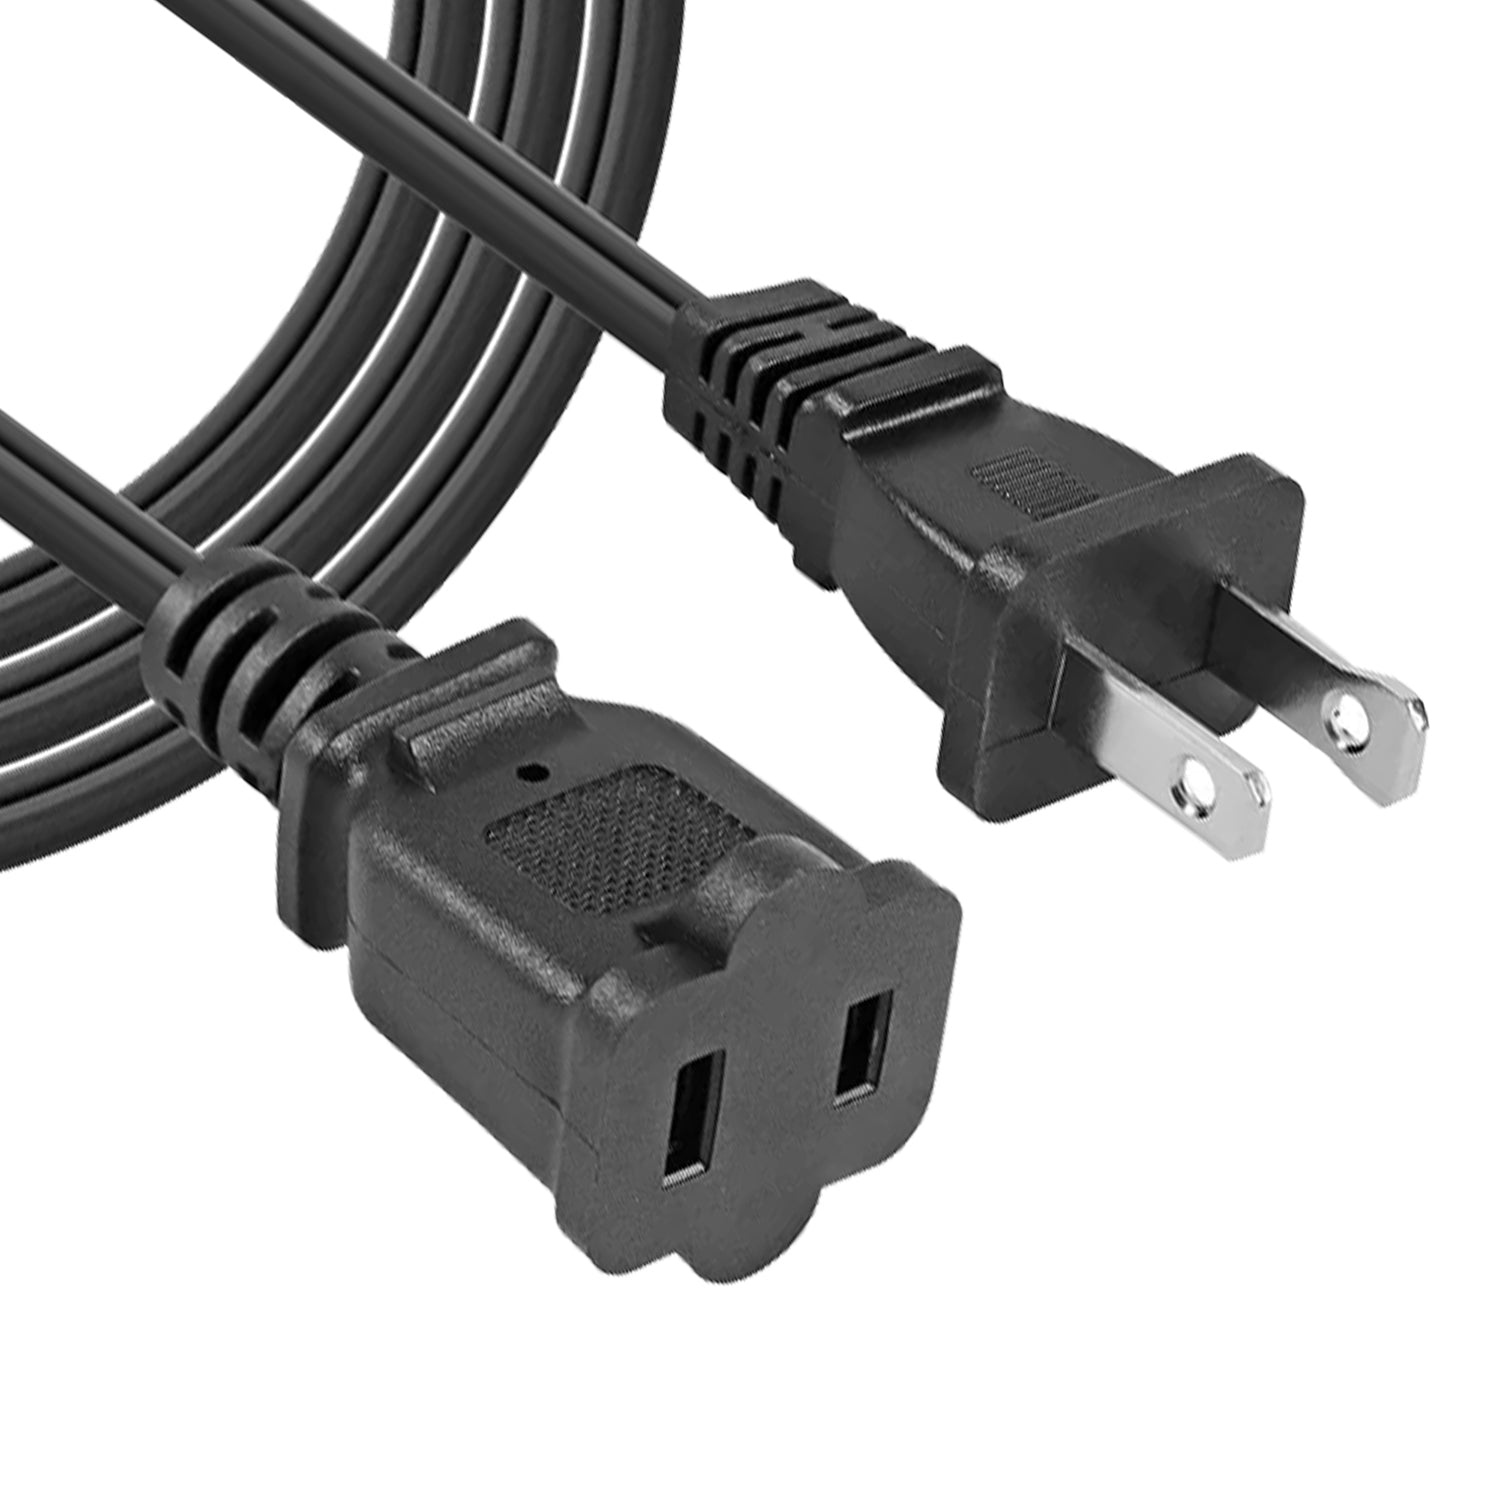 5 Core AC Power Cord 12 Ft US Polarized Male to Female 2 Prong Extension Adapter Cords 16AWG 125V